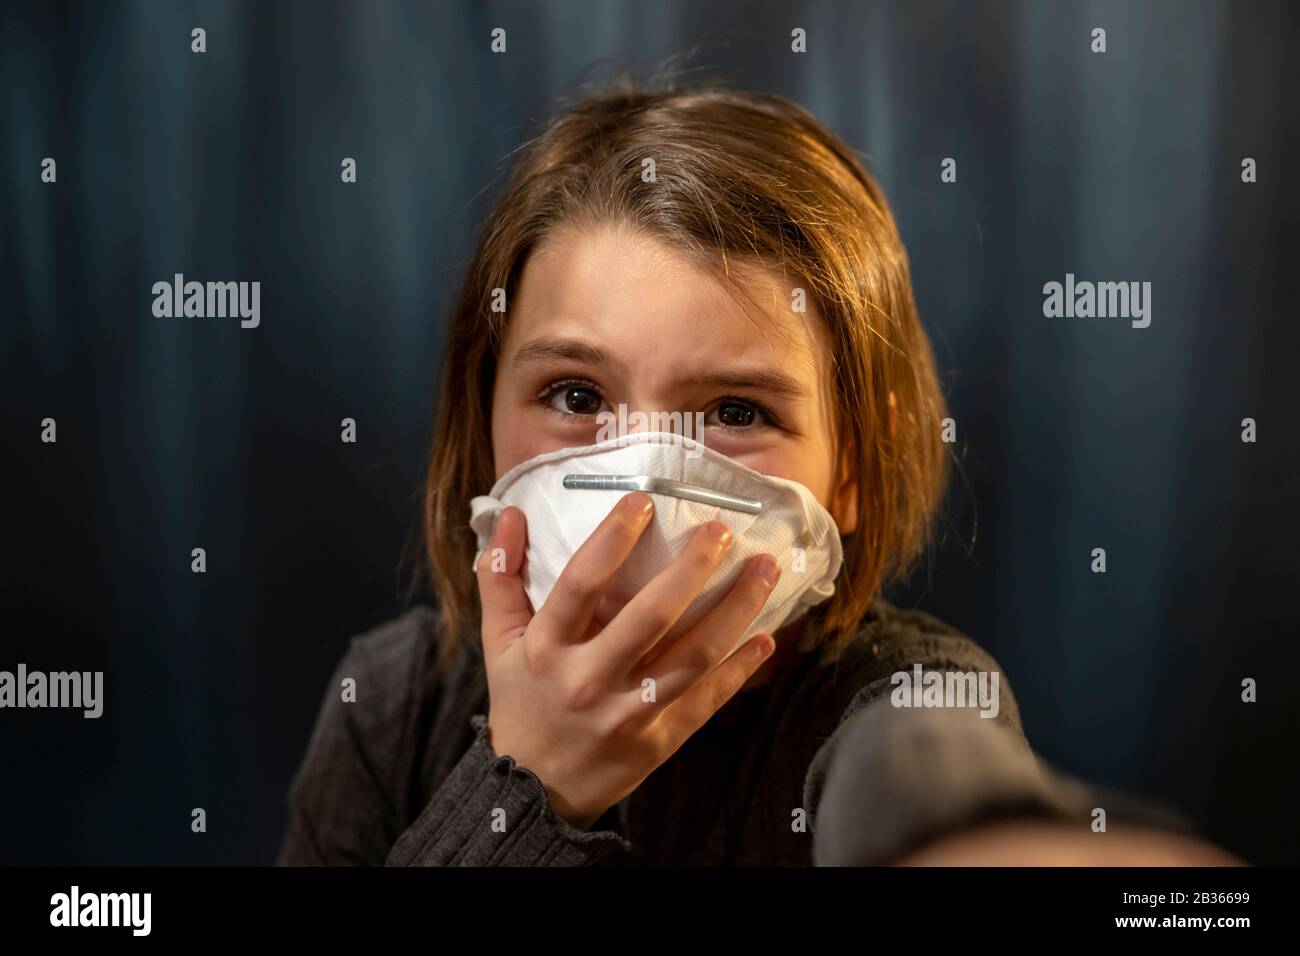 Young girl wearing a protection mask against the corona virus Stock Photo